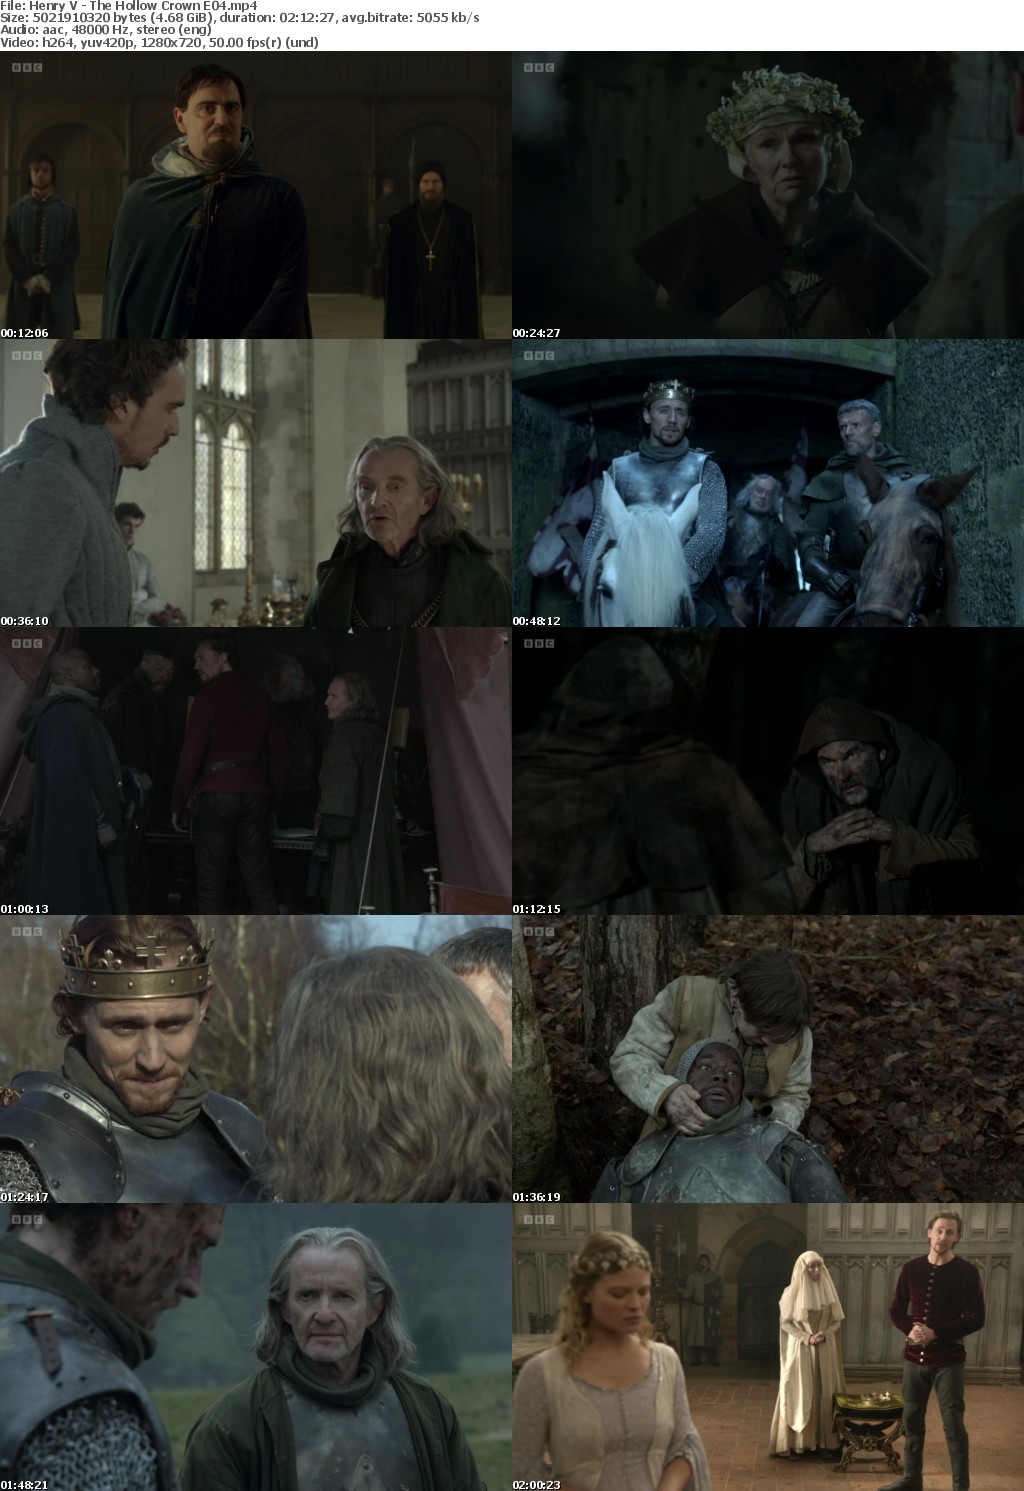 Henry V - The Hollow Crown E04 (Hiddleston, Griffiths, Joseph) (1280x720p HD, 50fps, soft Eng subs)